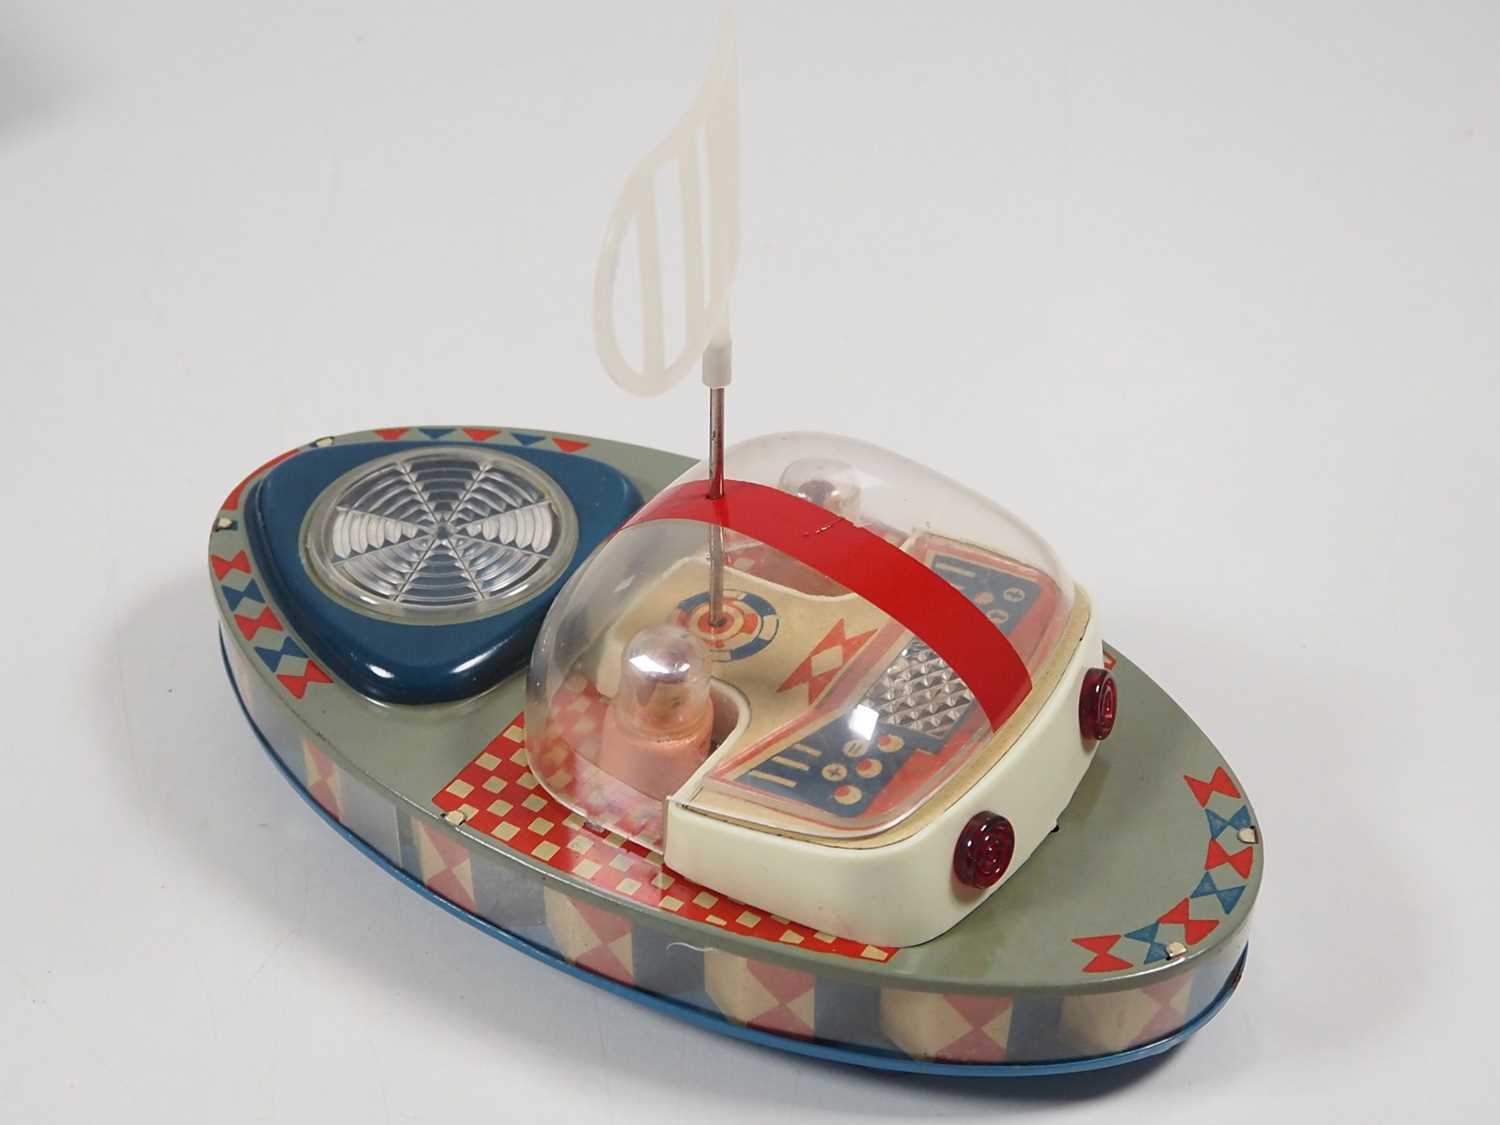 An ITES vintage Czechoslovakian tinplate battery operated cosmic exploration vehicle in original box - Image 5 of 6